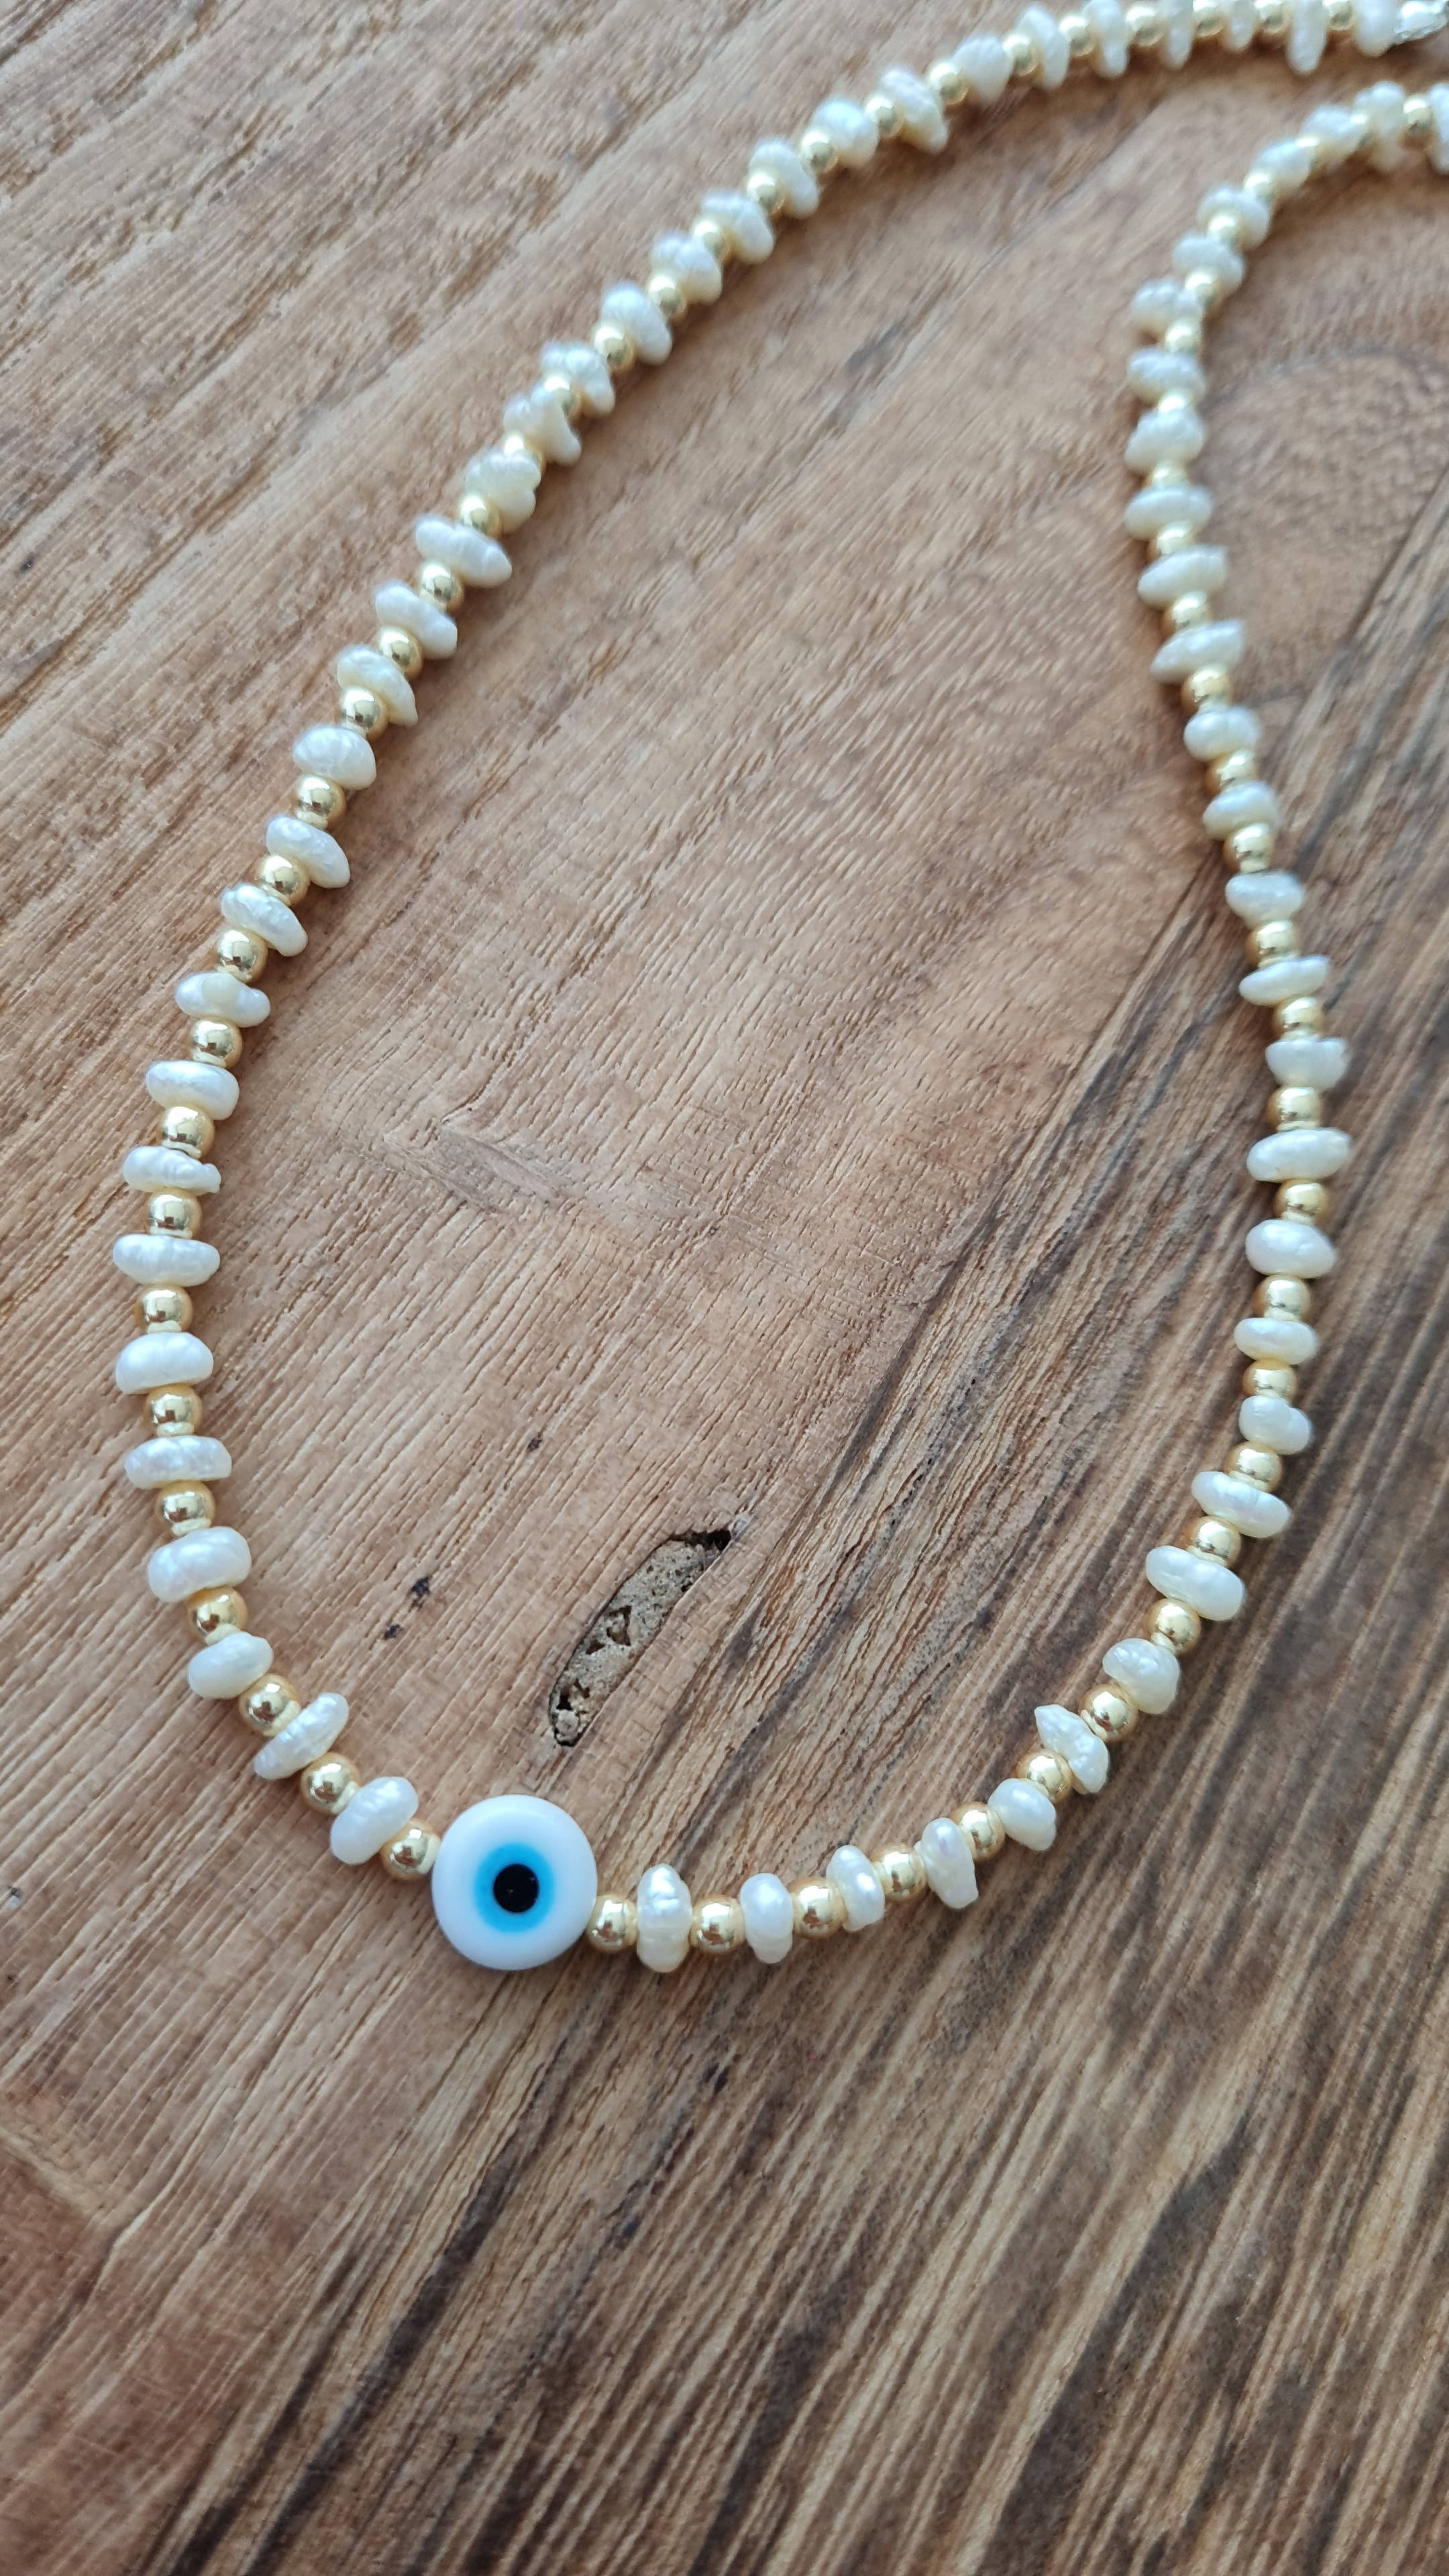 Freshwater pearl with eye